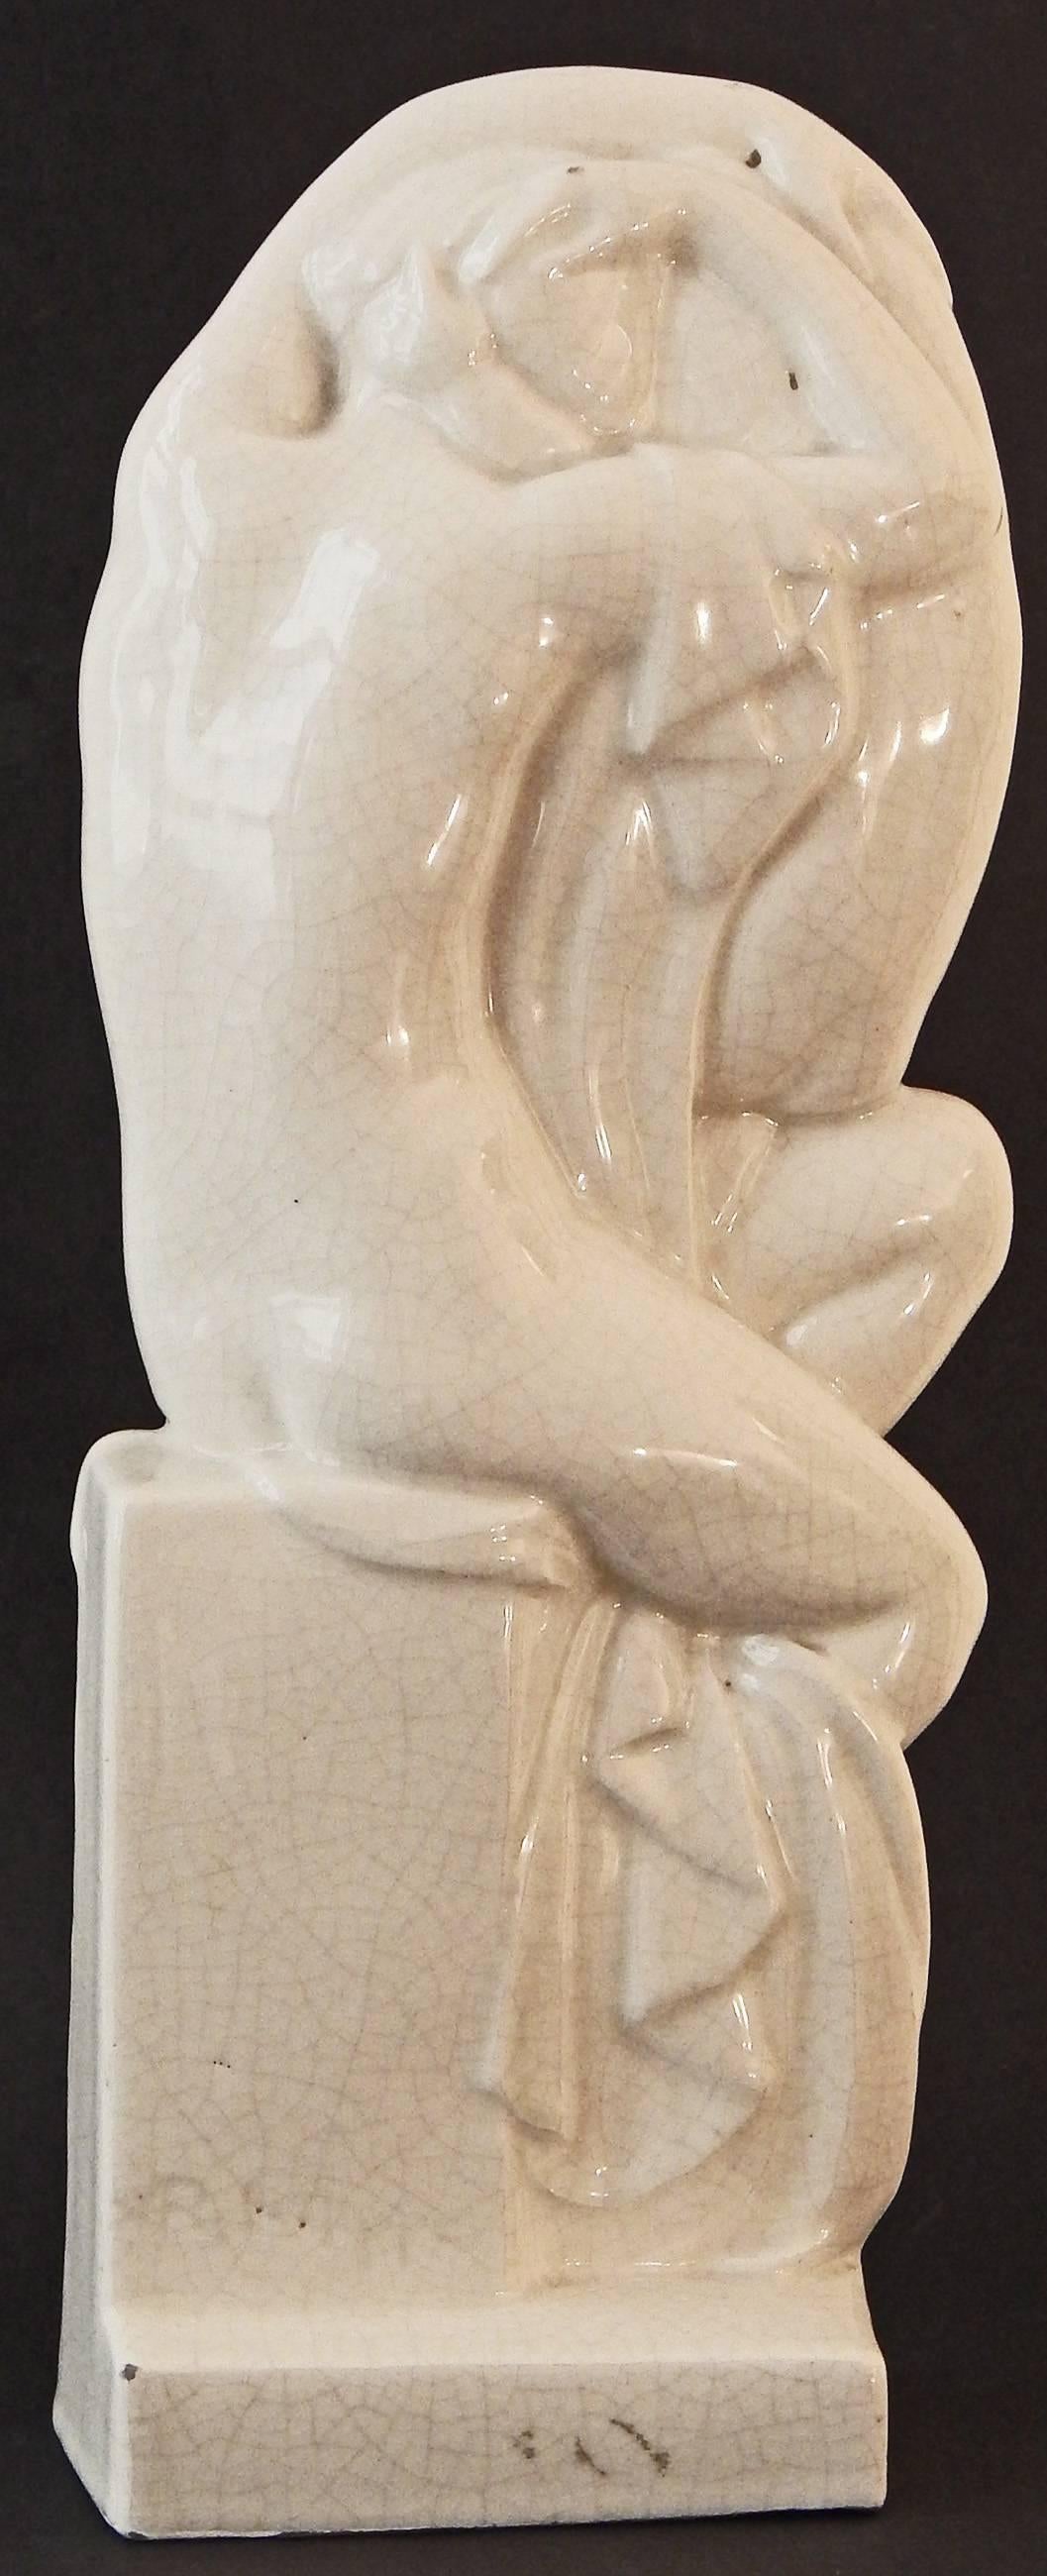 Unusually large and lovely, this ceramic sculpture by R. Philippe depicts a mother with child on her knee, with the arms of the two figures entwined, serving as a kind of Art Deco aureole hovering overhead. Philippe is known for his lithe, elegant